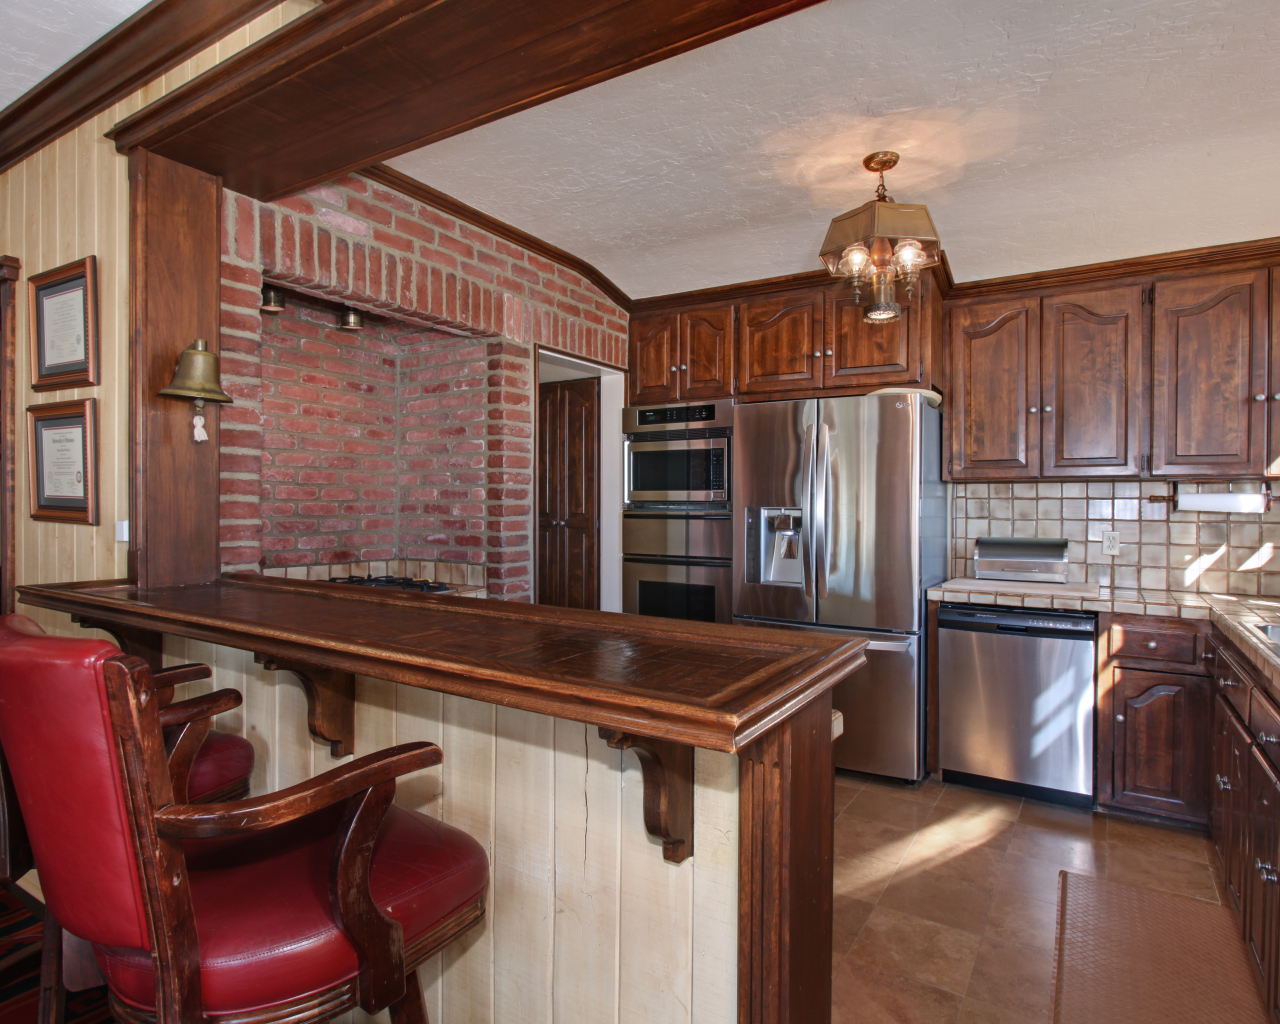 Spacious kitchen with wooden furniture and leather chairs